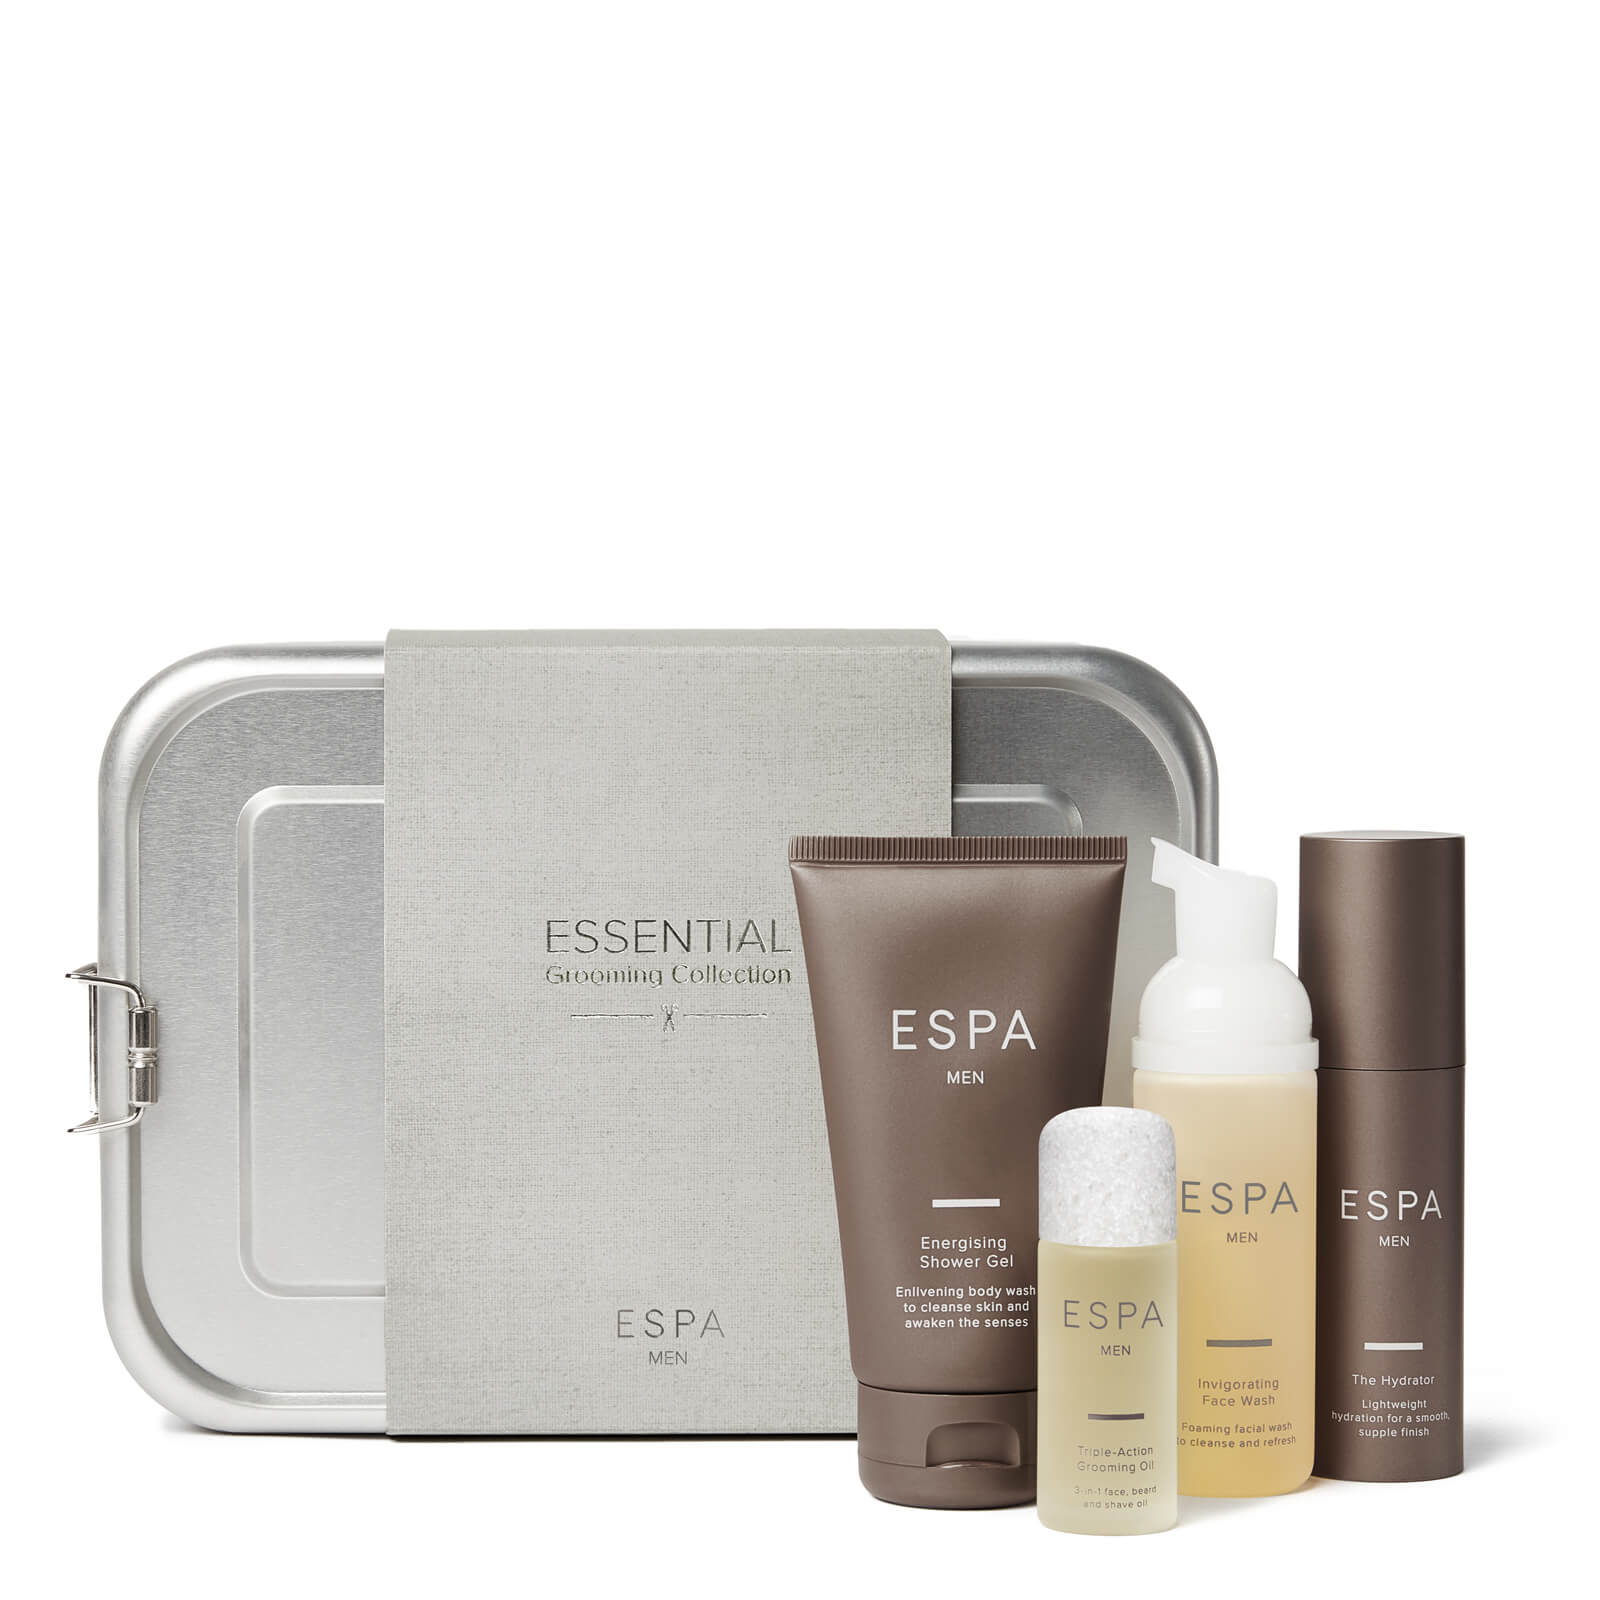 Shop Espa Essential Grooming Collection